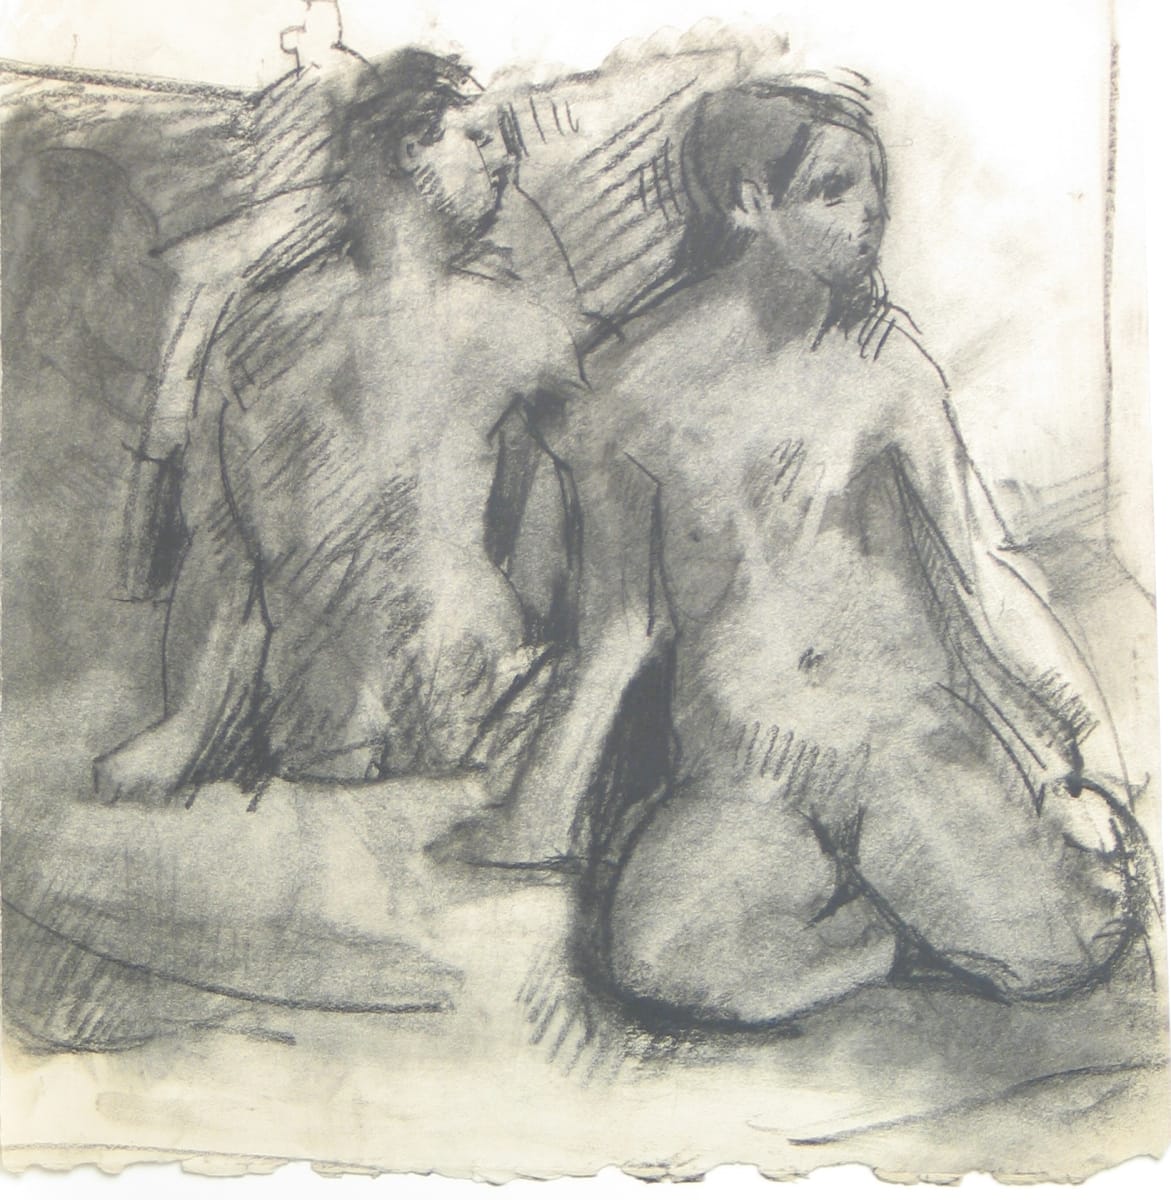 Portfolio box #226 Drawings, oil on paper [1955-1966]  Image: #226.28, charcoal on paper, 14x13.5"